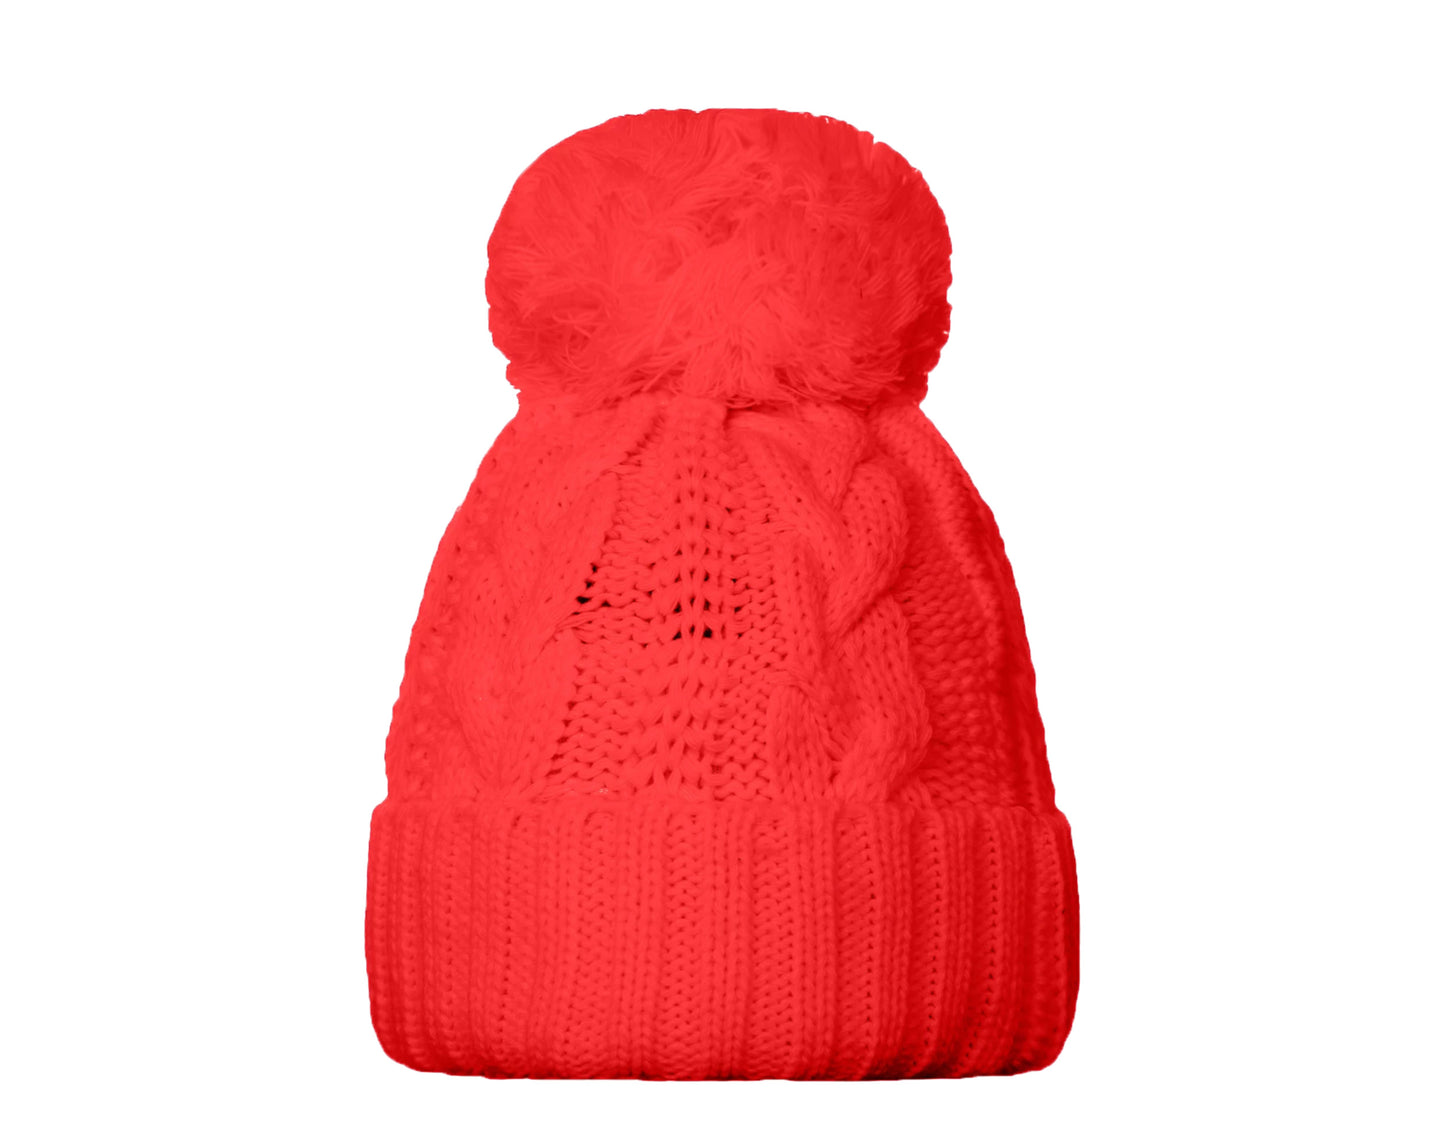 Invicta Tuque Pom-Pom Red Knit Cuffed Hat 4458122H-0003